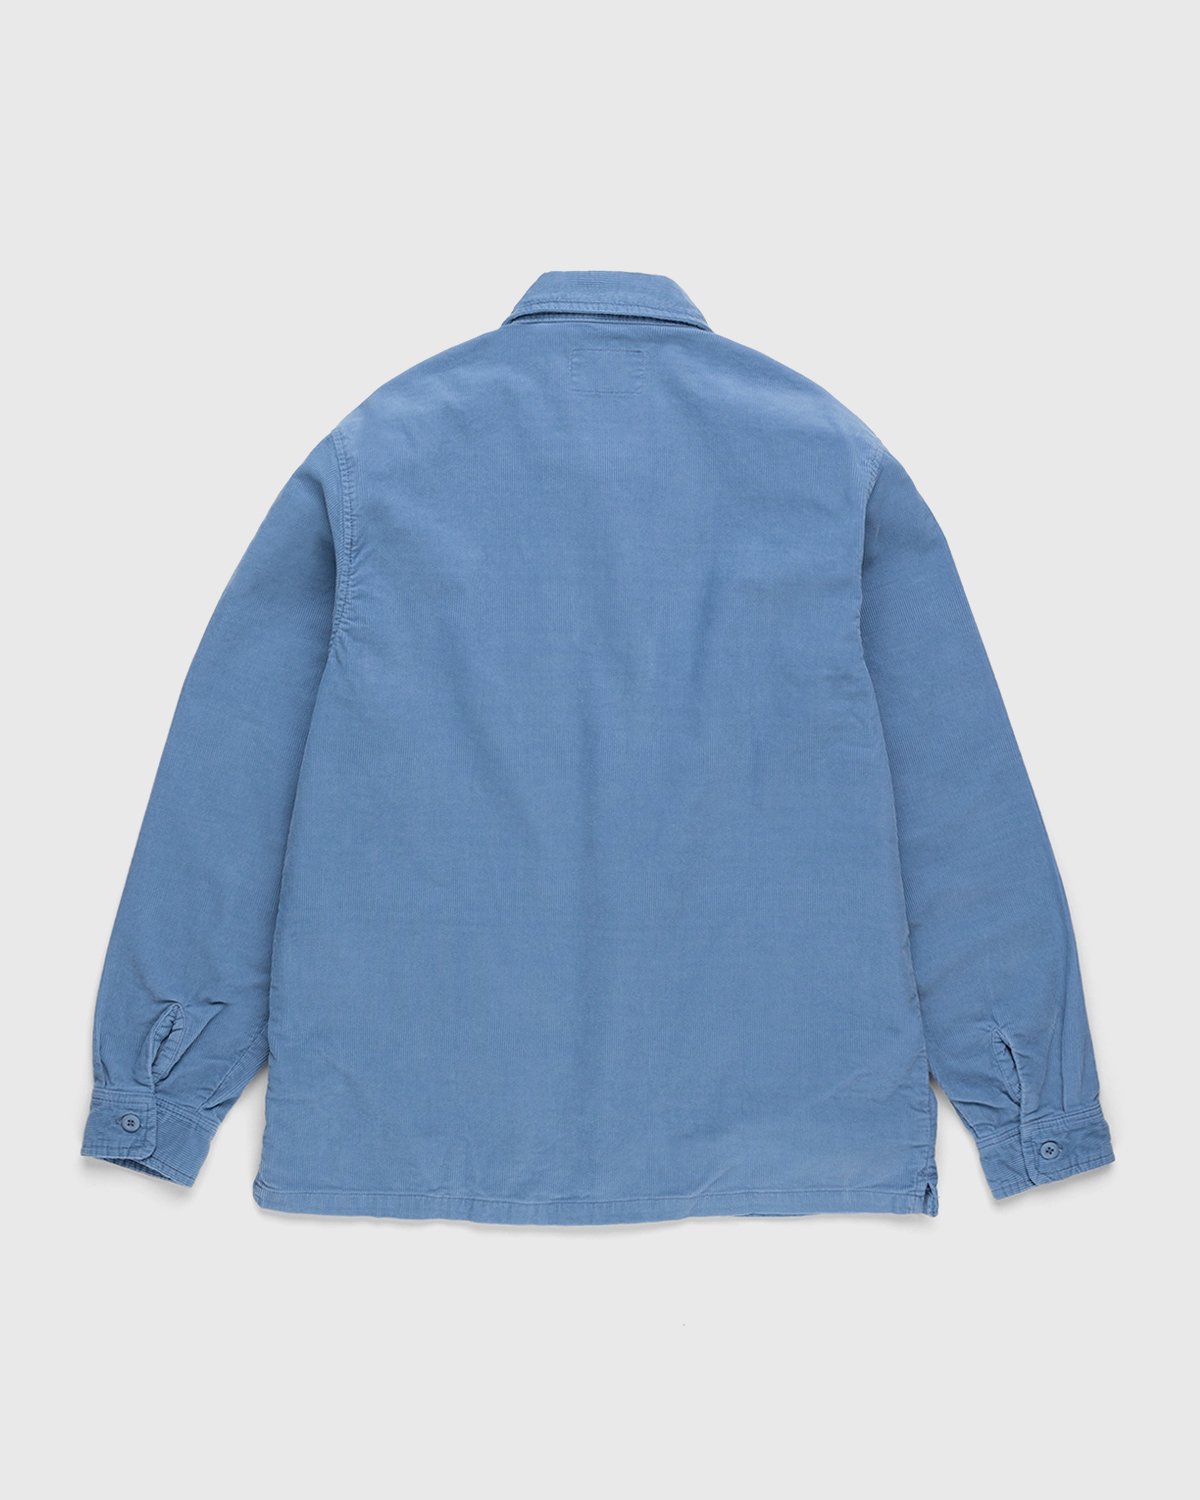 Carhartt WIP - Dixon Shirt Jacket Icy Water Rinsed - Clothing - Blue - Image 2